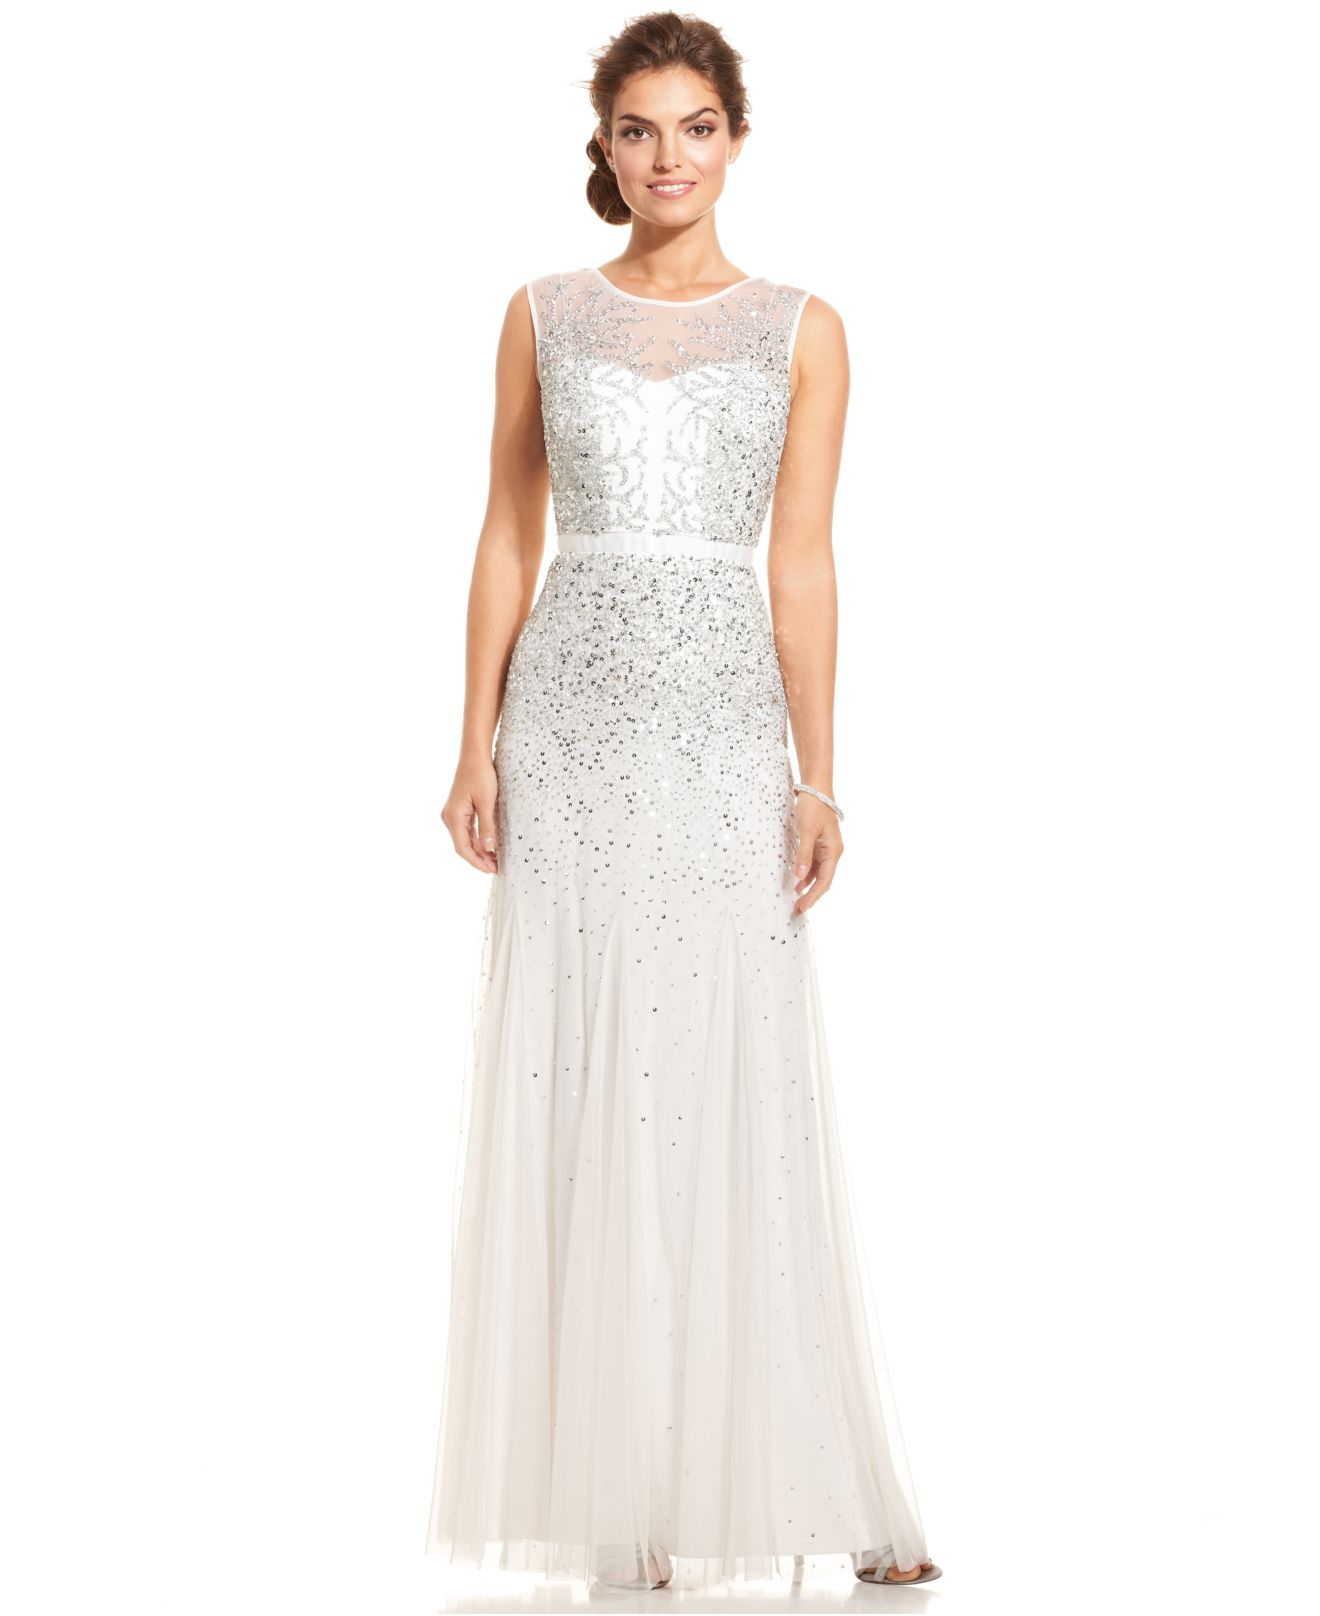 Adrianna Papell Sleeveless Beaded Illusion Gown in Ivory (White) - Lyst